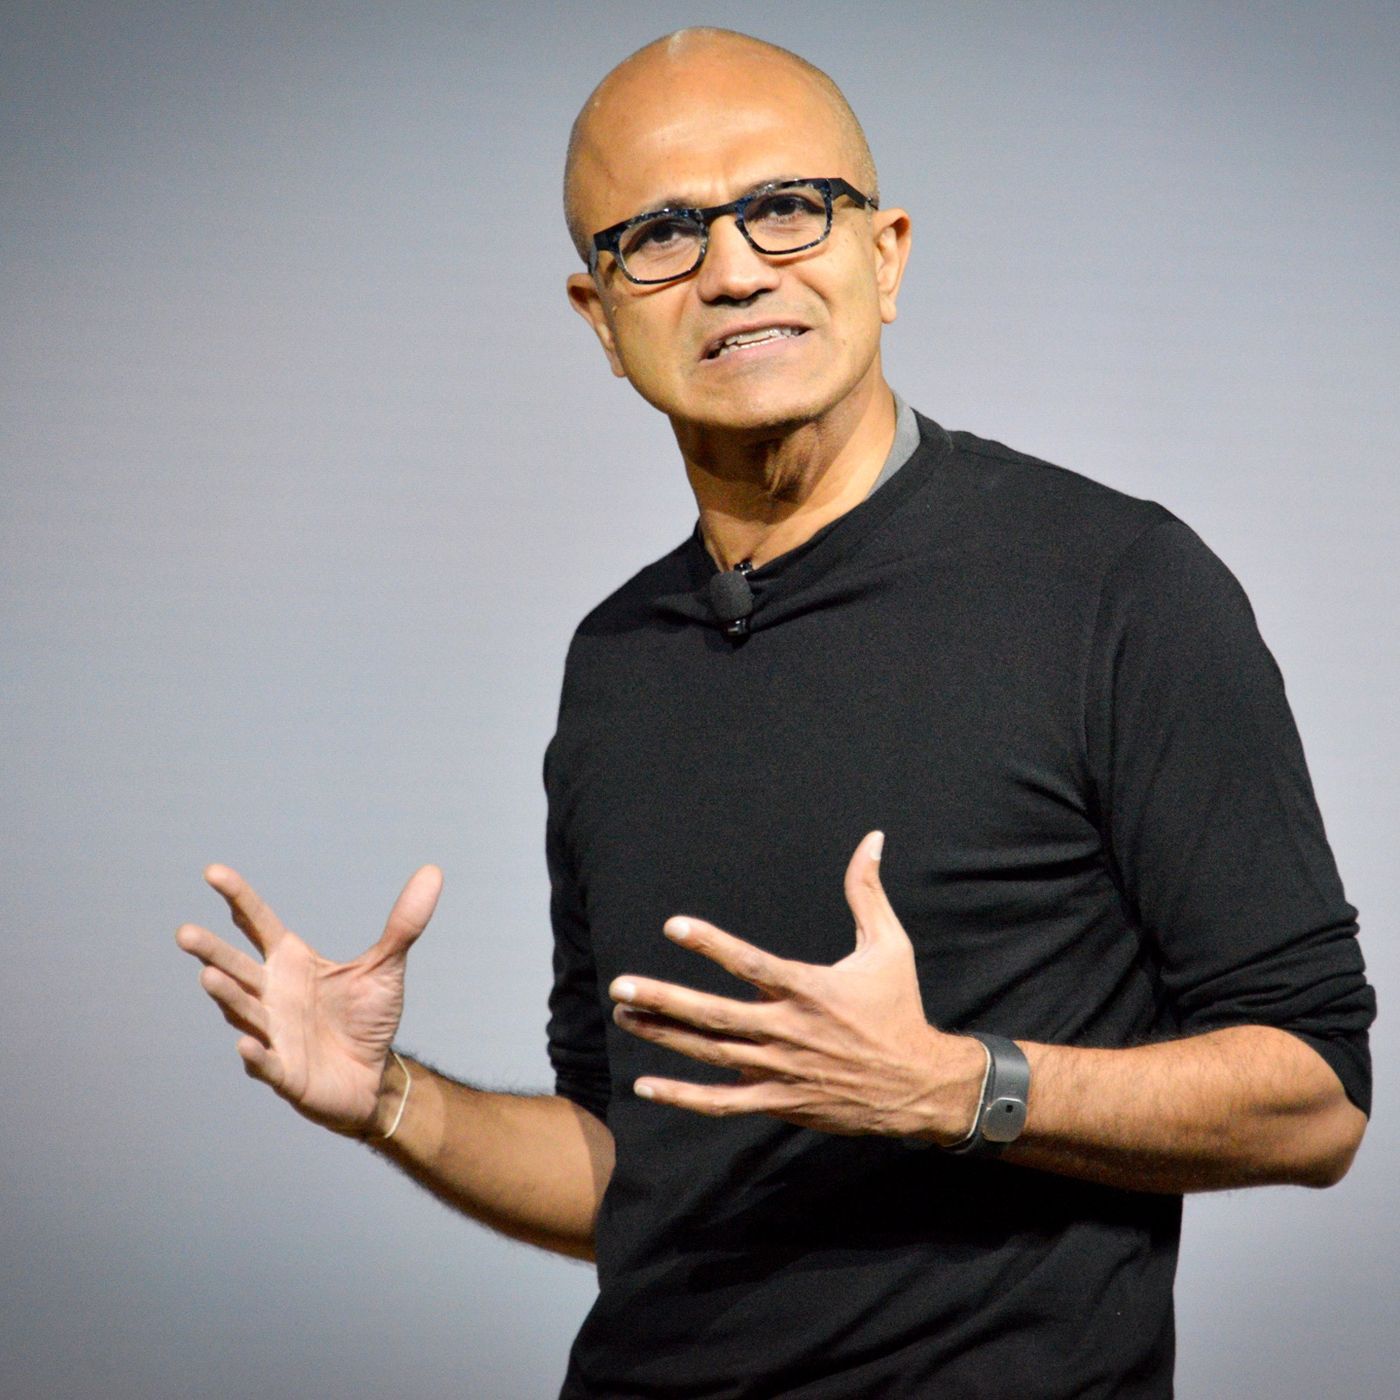 Microsoft CEO Satya Nadella sought out the silver lining in